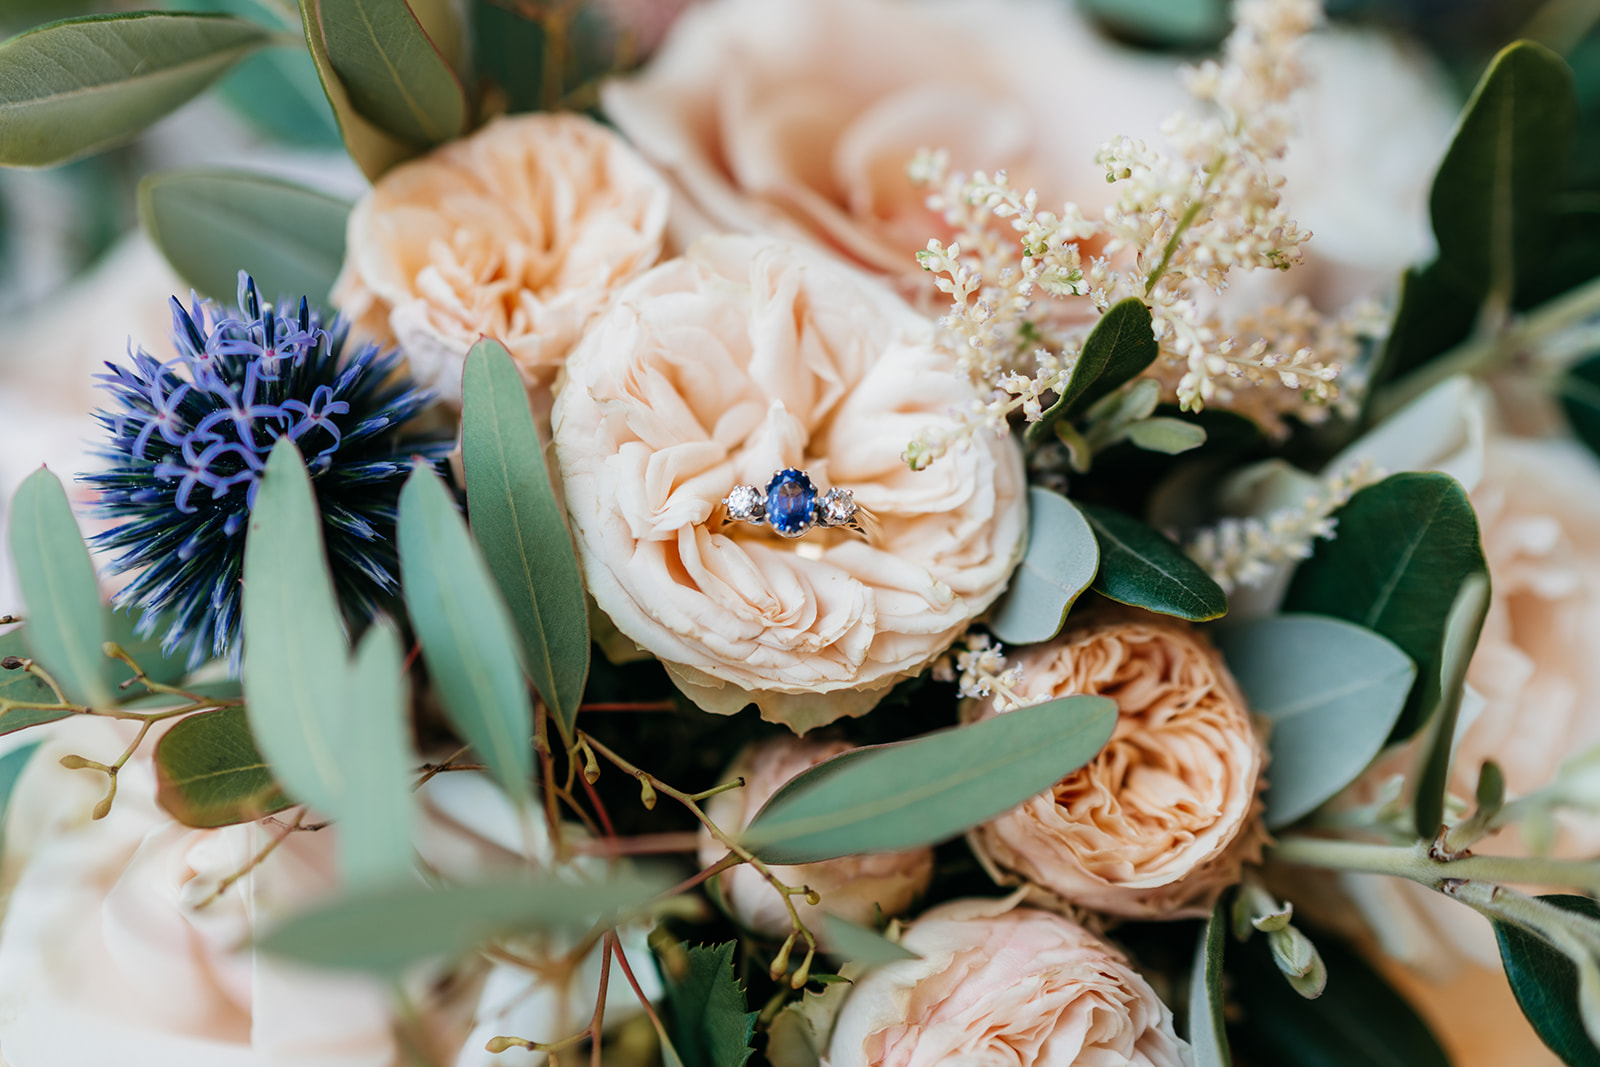 Brides engagement ring placed in her wedding flowers. Wedding flowers by Alexandra Sylvester flowers